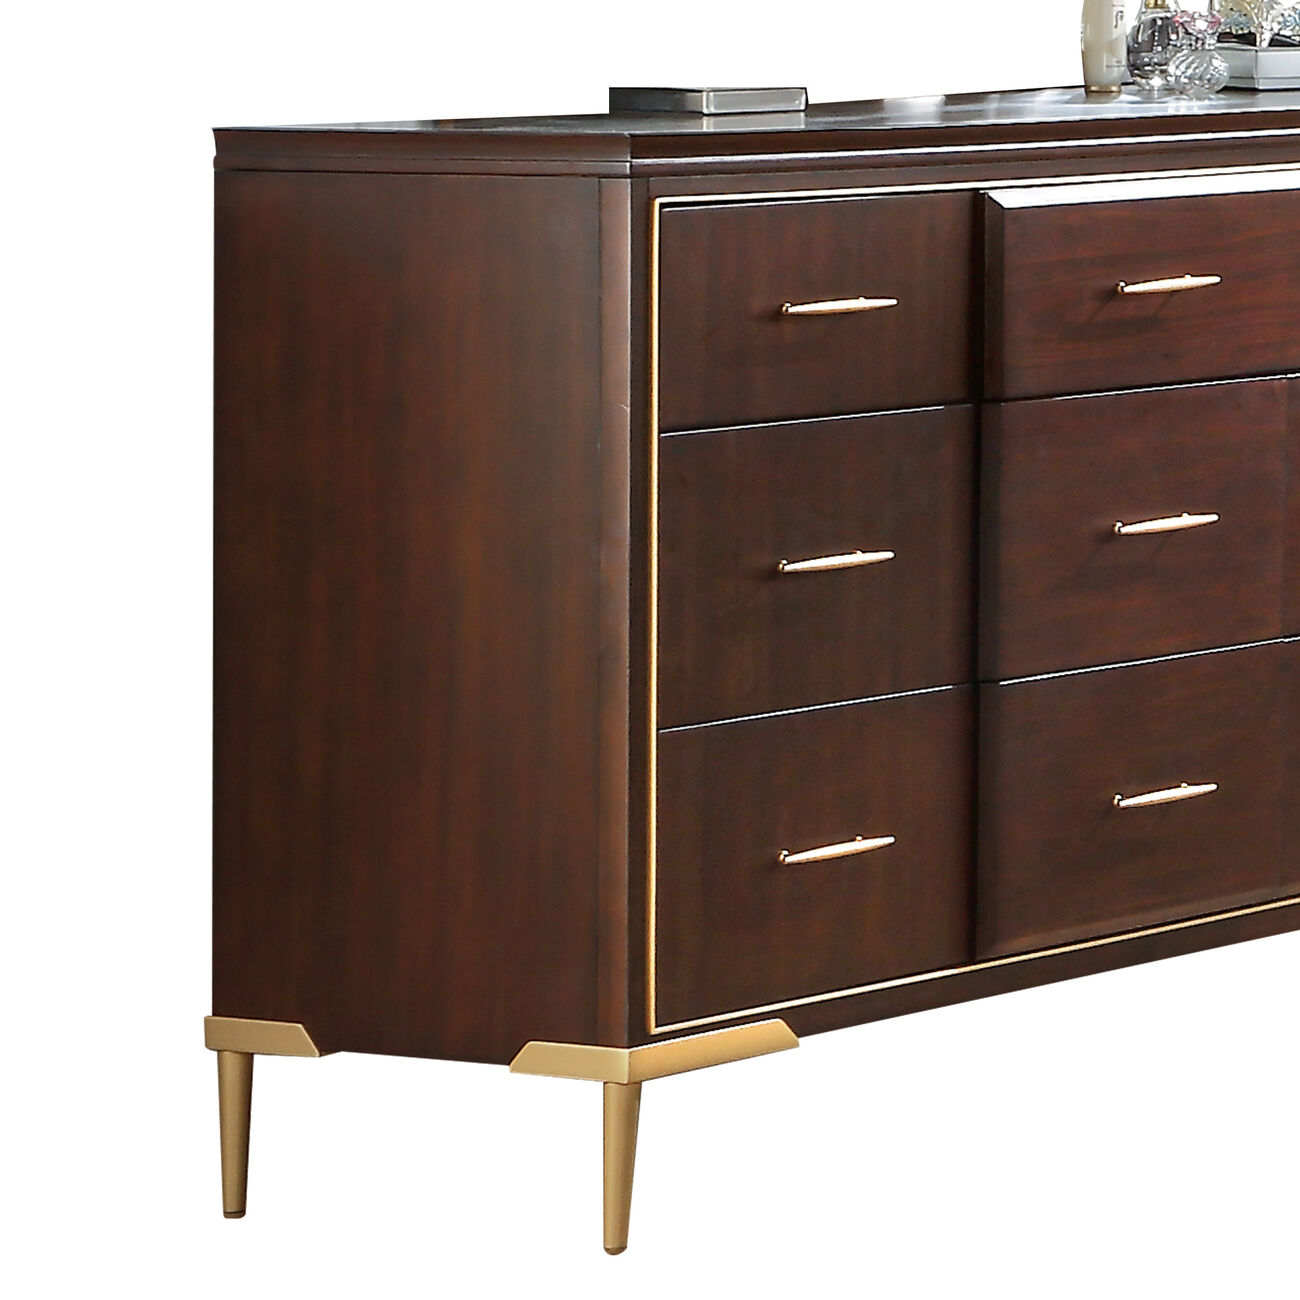 Wooden Dresser with Raised Panel and 7 Spacious Drawers,Brown and Gold